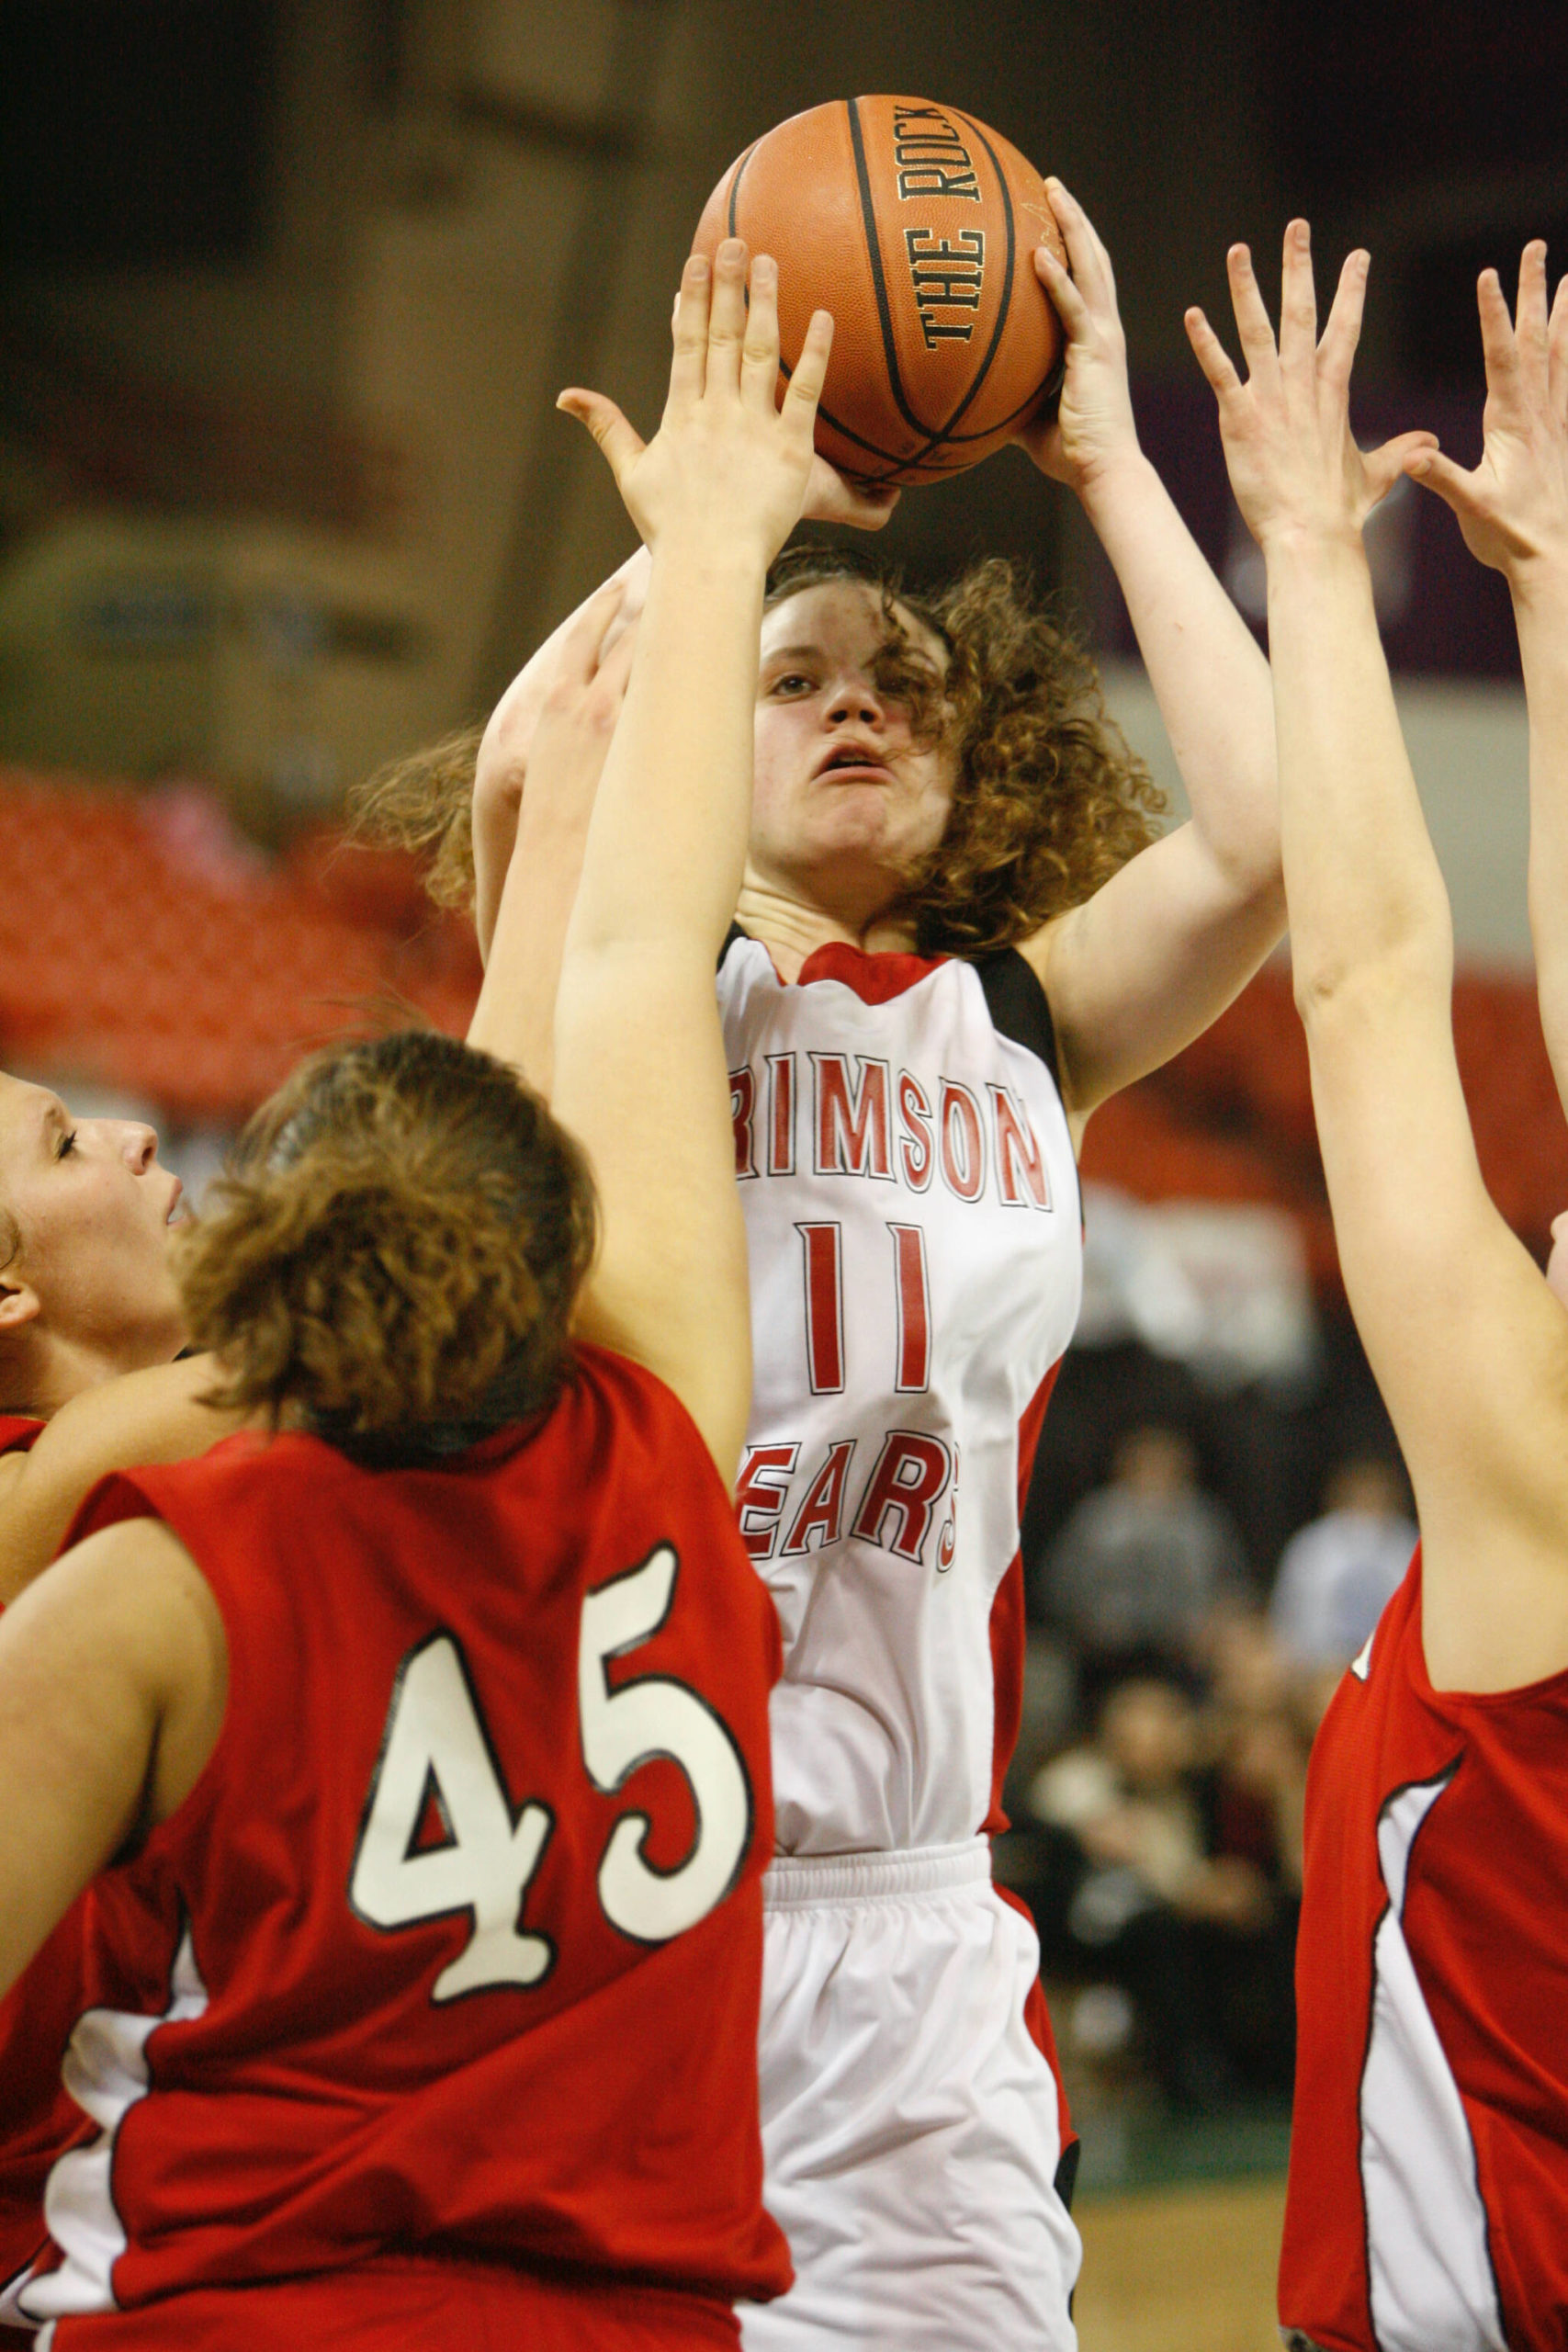 Klas Stolpe / For the Juneau Empire
Juneau-Douglas Crimson Bears senior Talisa Rhea shoots over Wasilla defenders during the 2007 Girls 4A State Championship game in Anchorage.